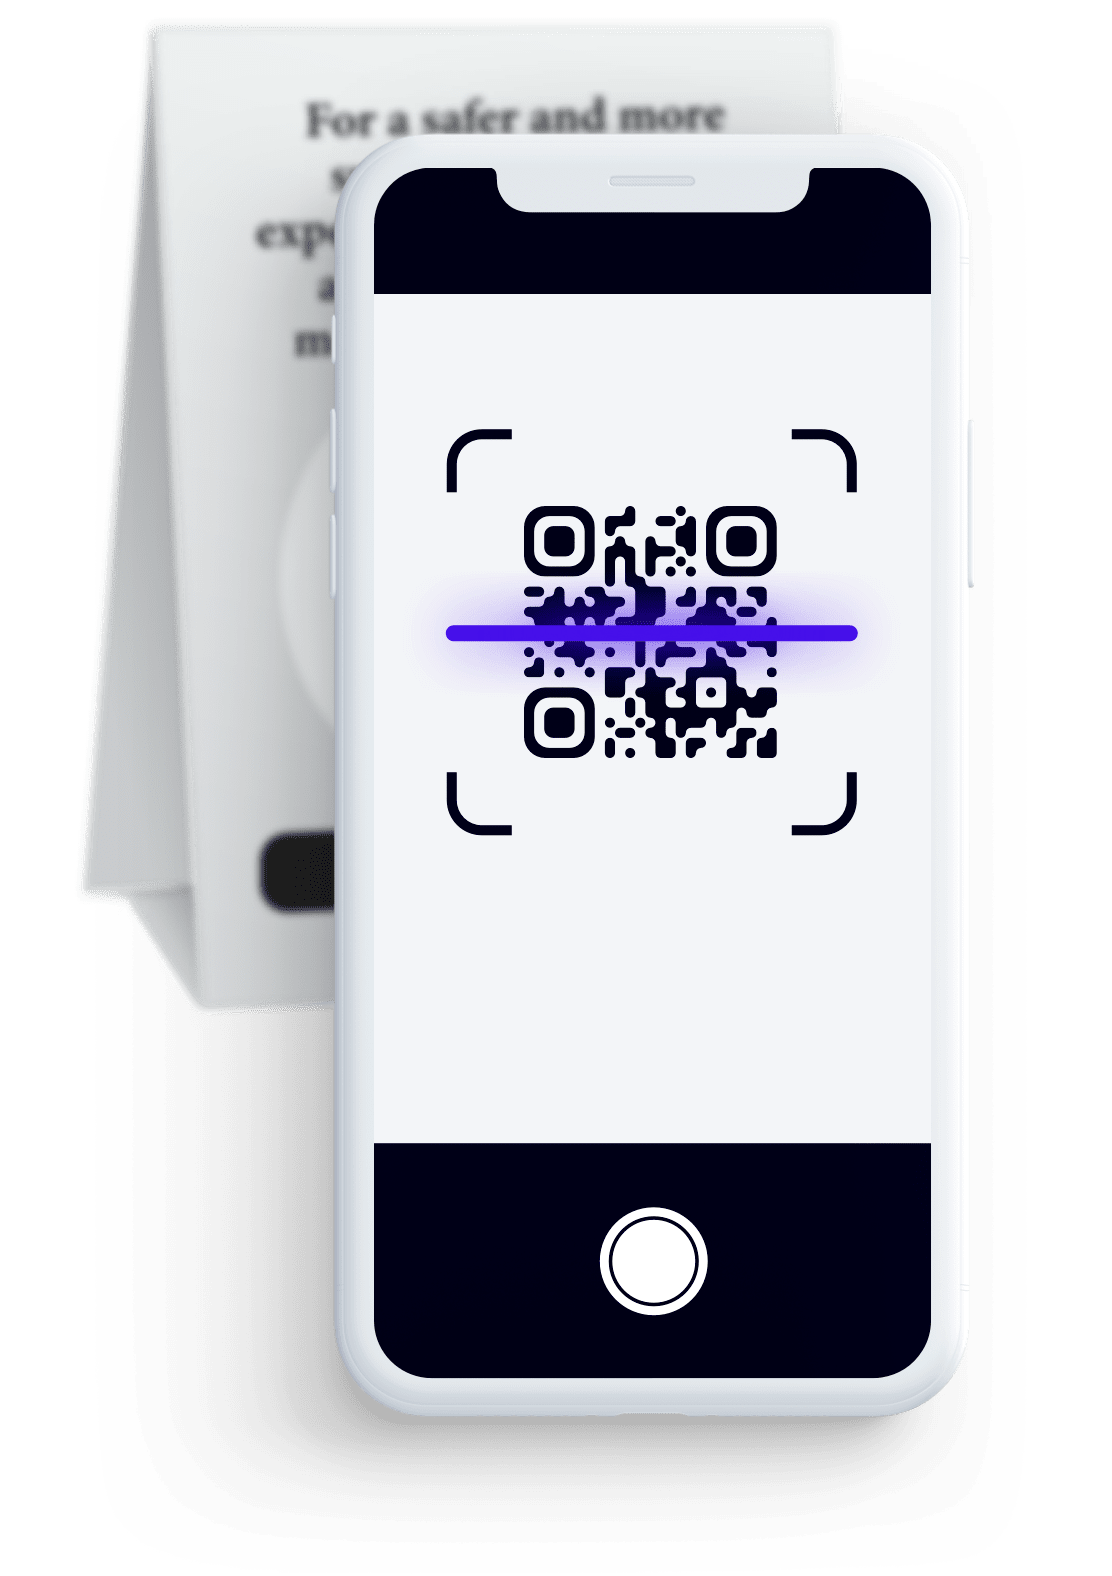 Phone with QR code scanner